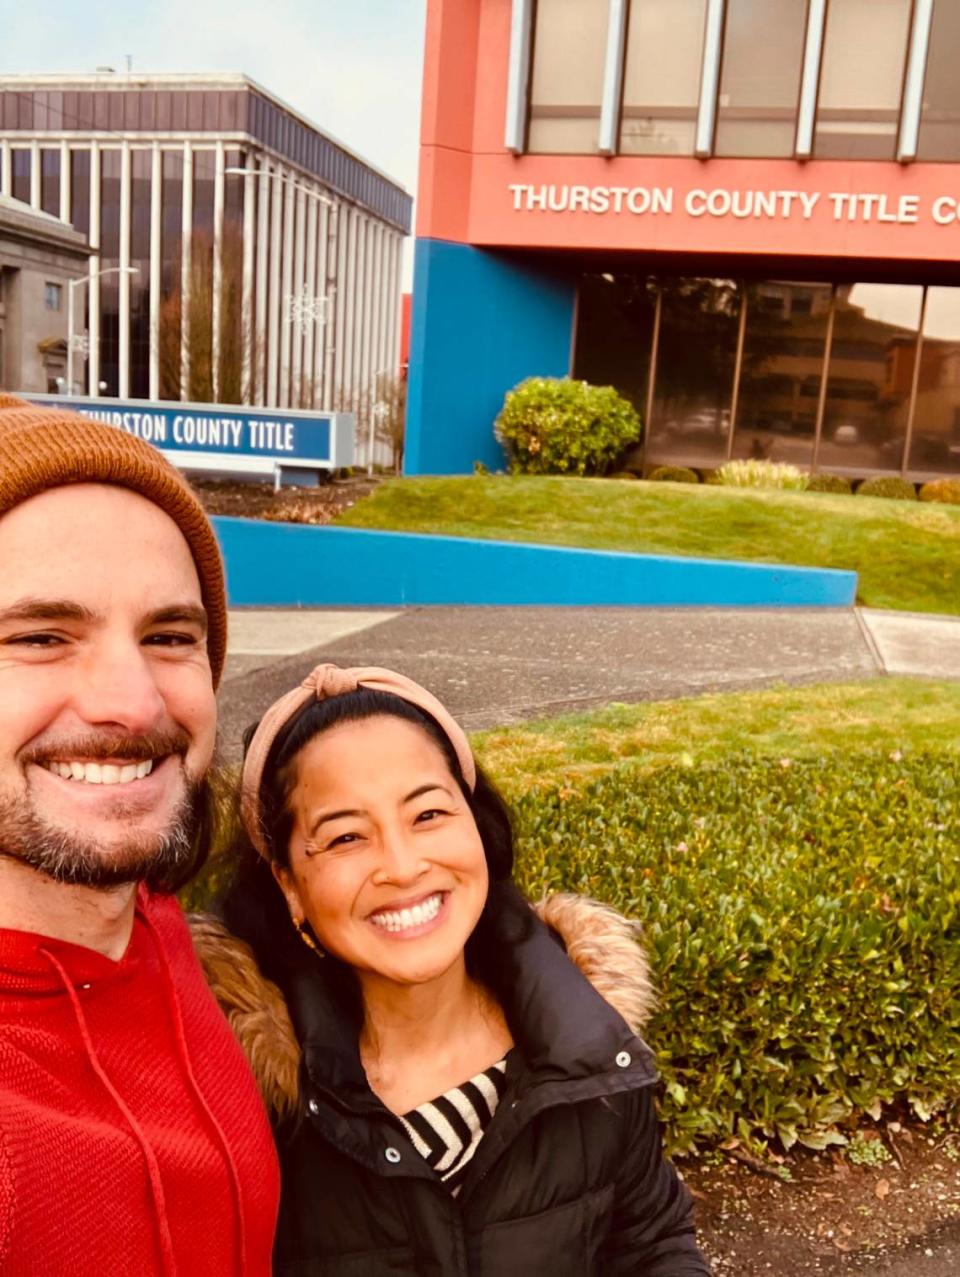 True Self Yoga owners Christina Lagdameo and Vajra Romano pose outside Thurston County Title after acquiring a nearby building to expand their west Olympia business.